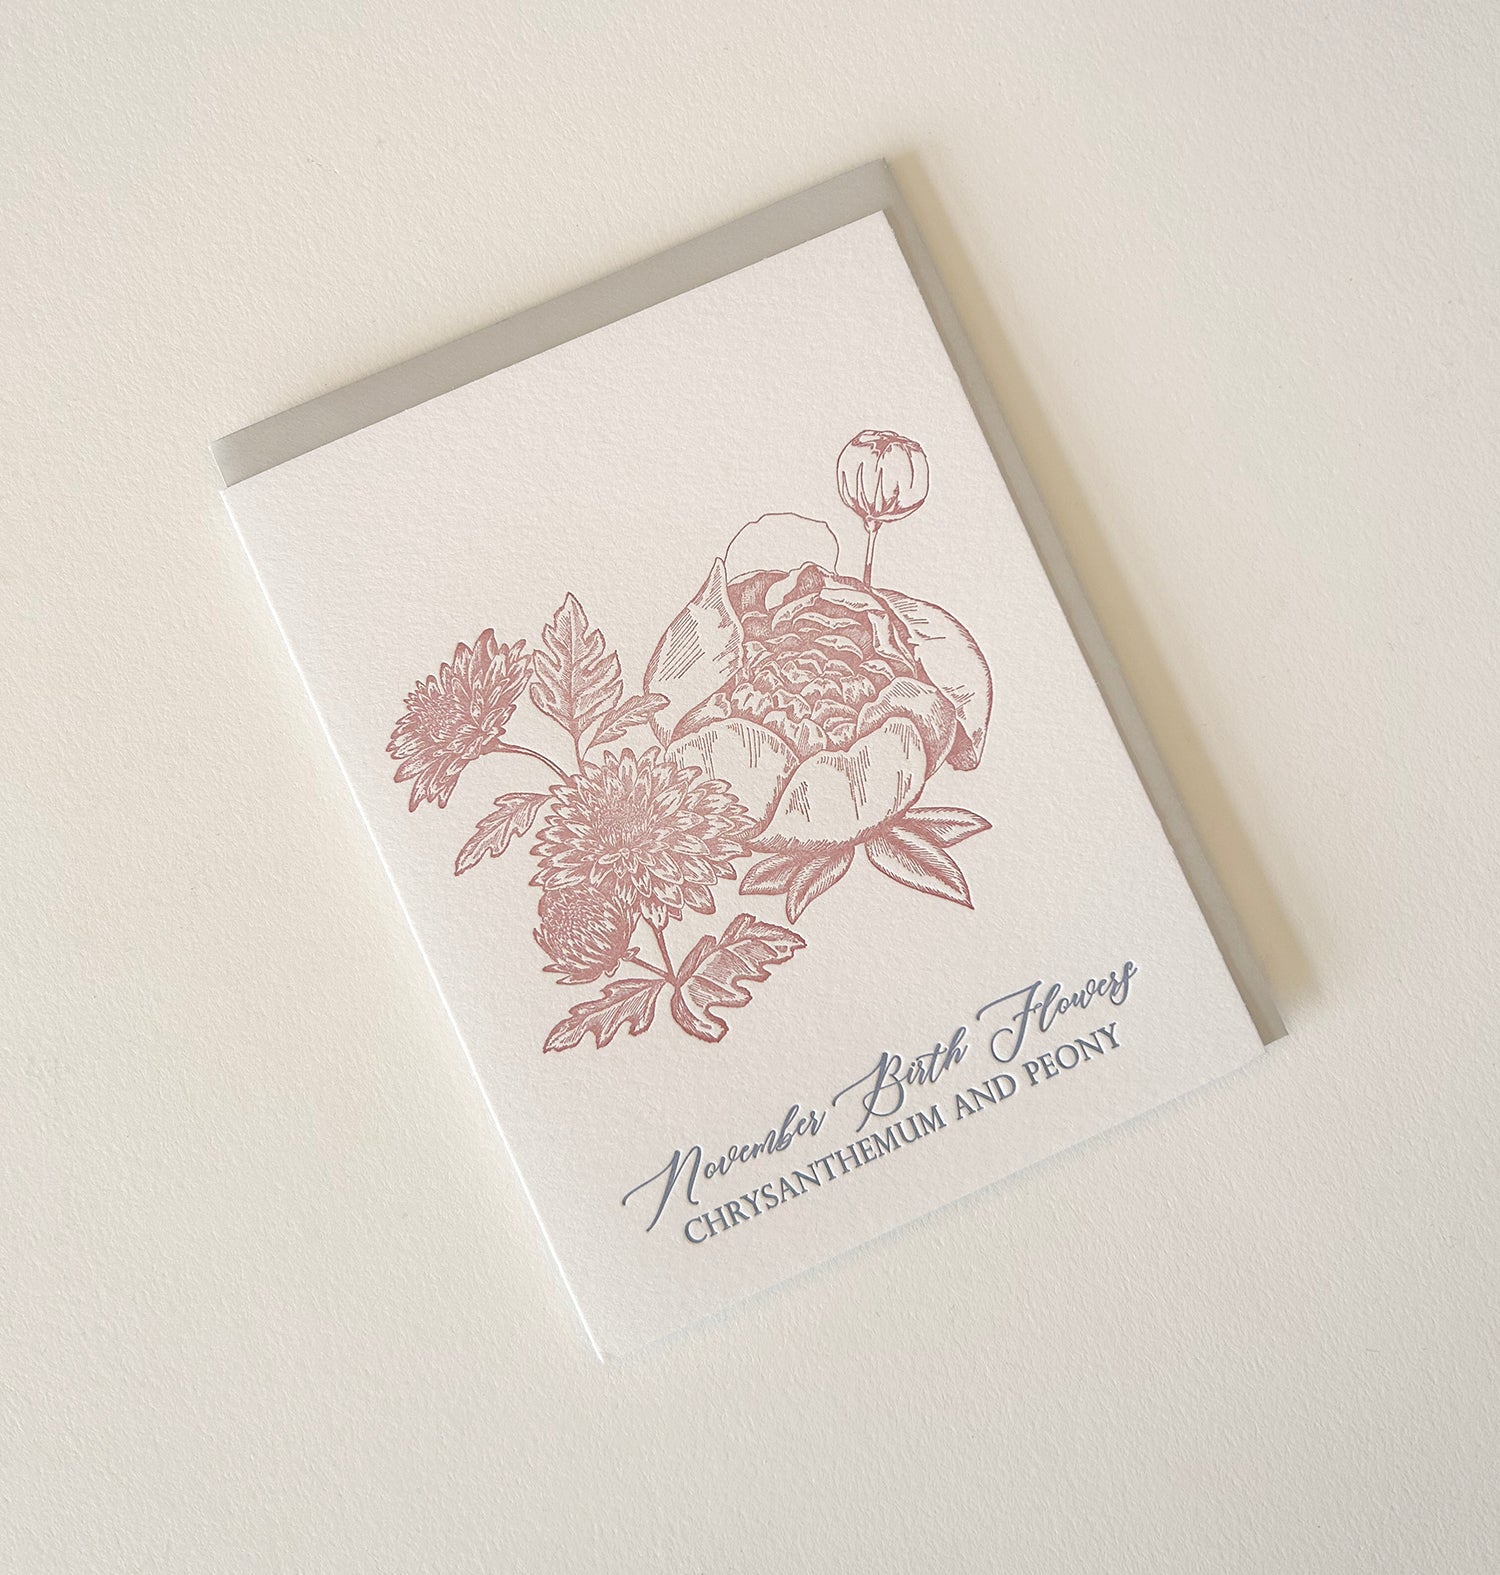 Letterpress birthday card with florals that says "November birth flowers chrysanthemum and peony" by Rust Belt Love